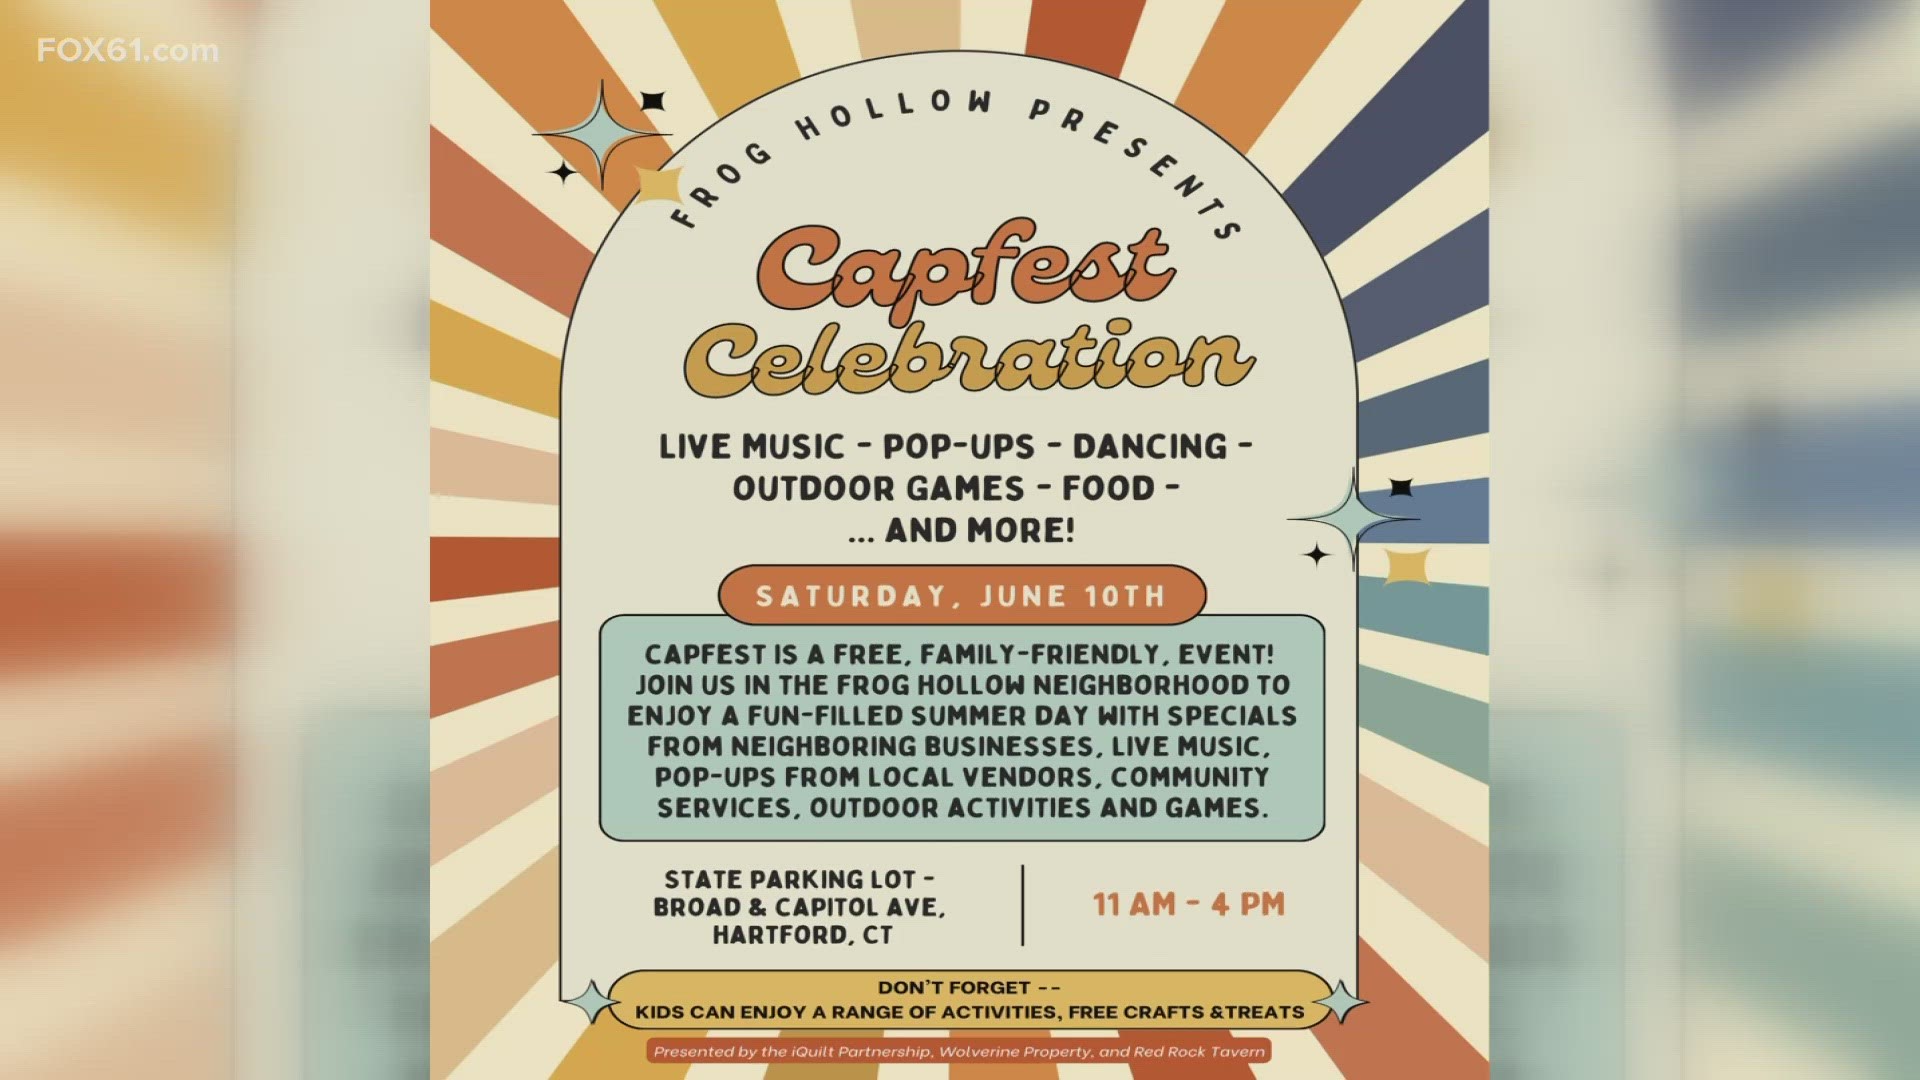 CapFest will have music, vendors and fun activities at the State Street parking lot, at Broad St. and Capitol Ave. in Hartford.